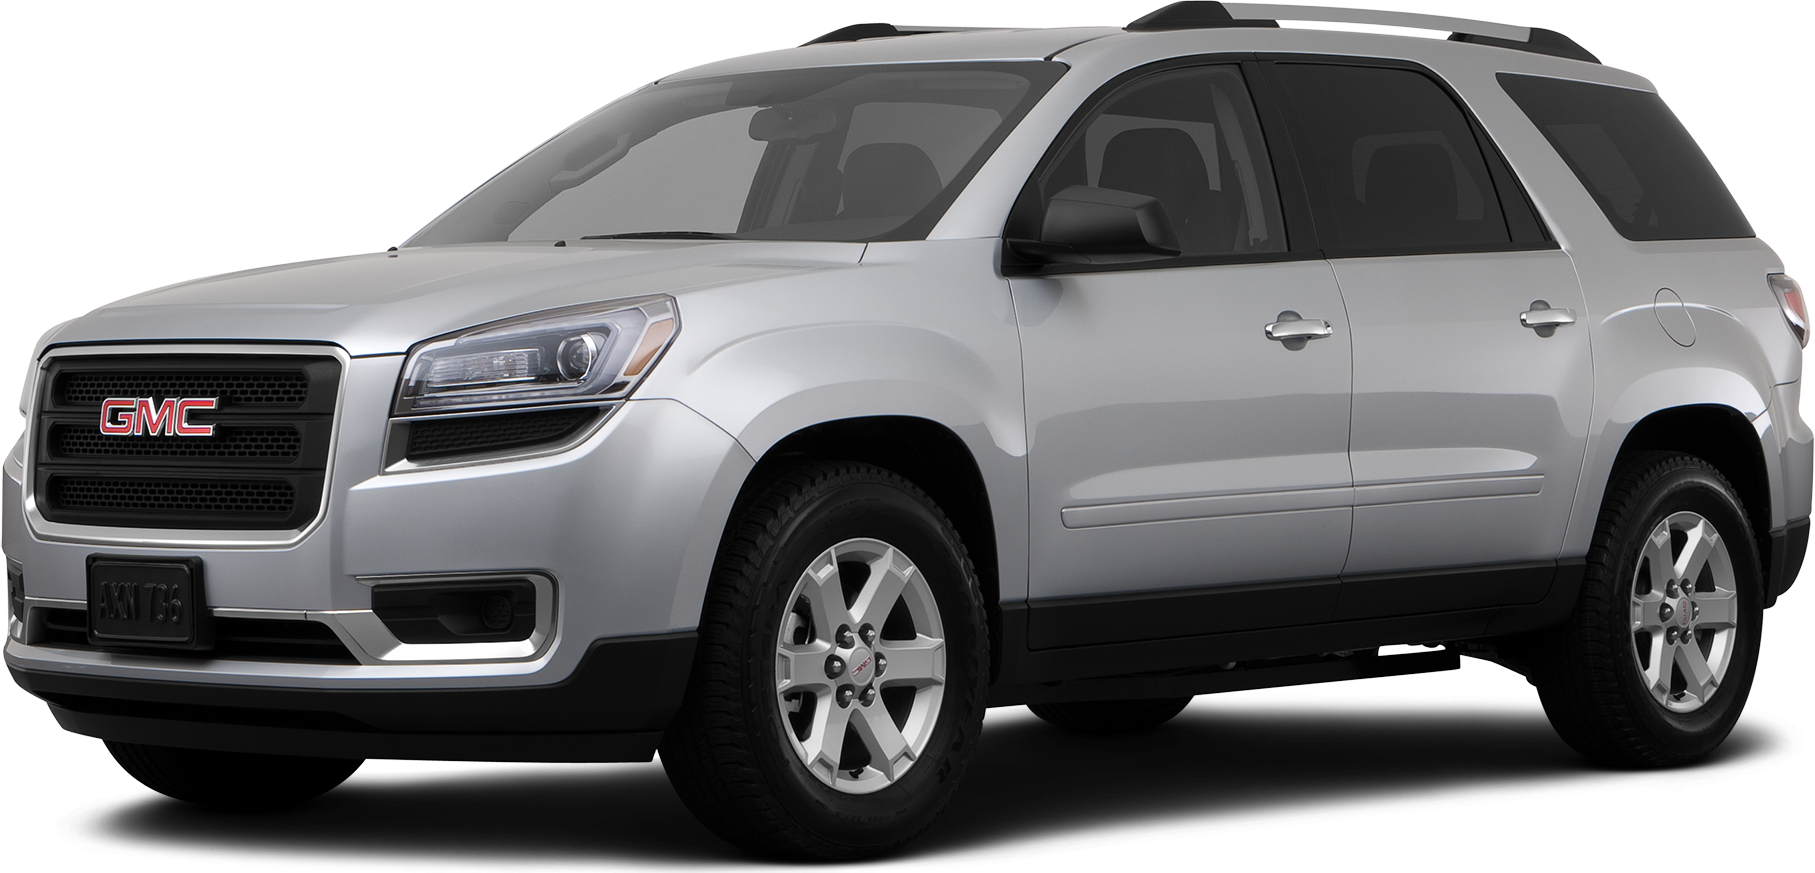 2013 Gmc Acadia Price Value Ratings And Reviews Kelley Blue Book